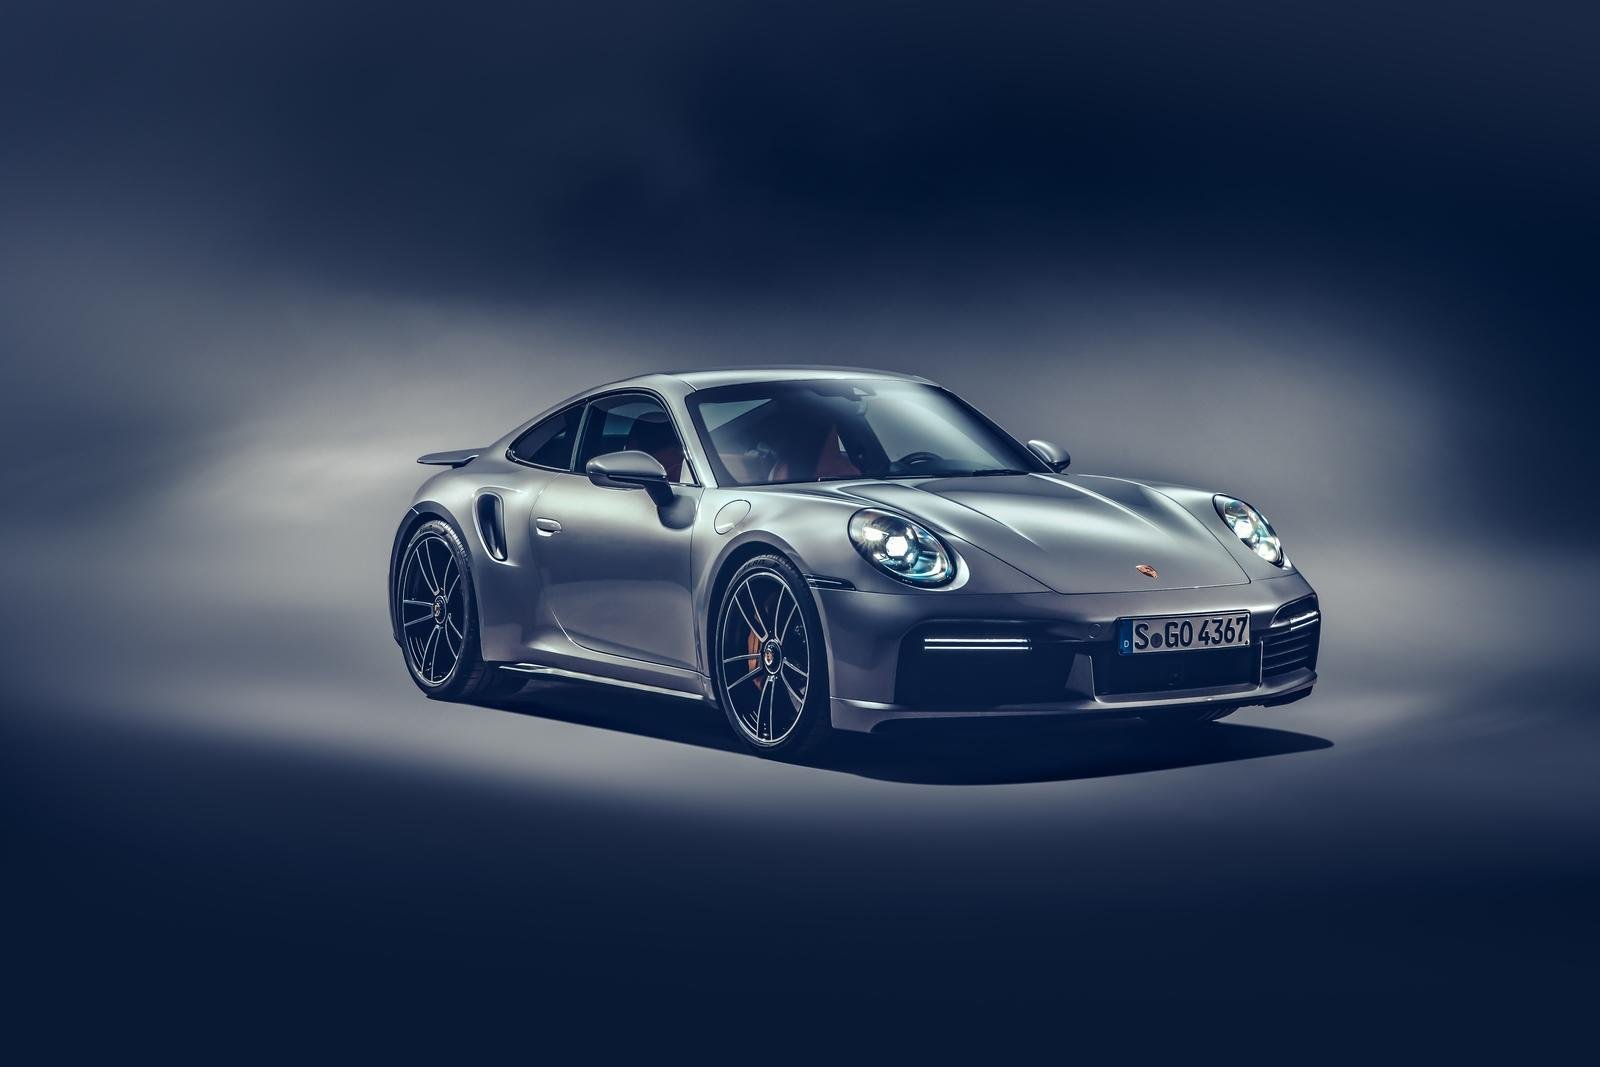 10 Things That Make the Porsche 911 Turbo The Ultimate Sports Car